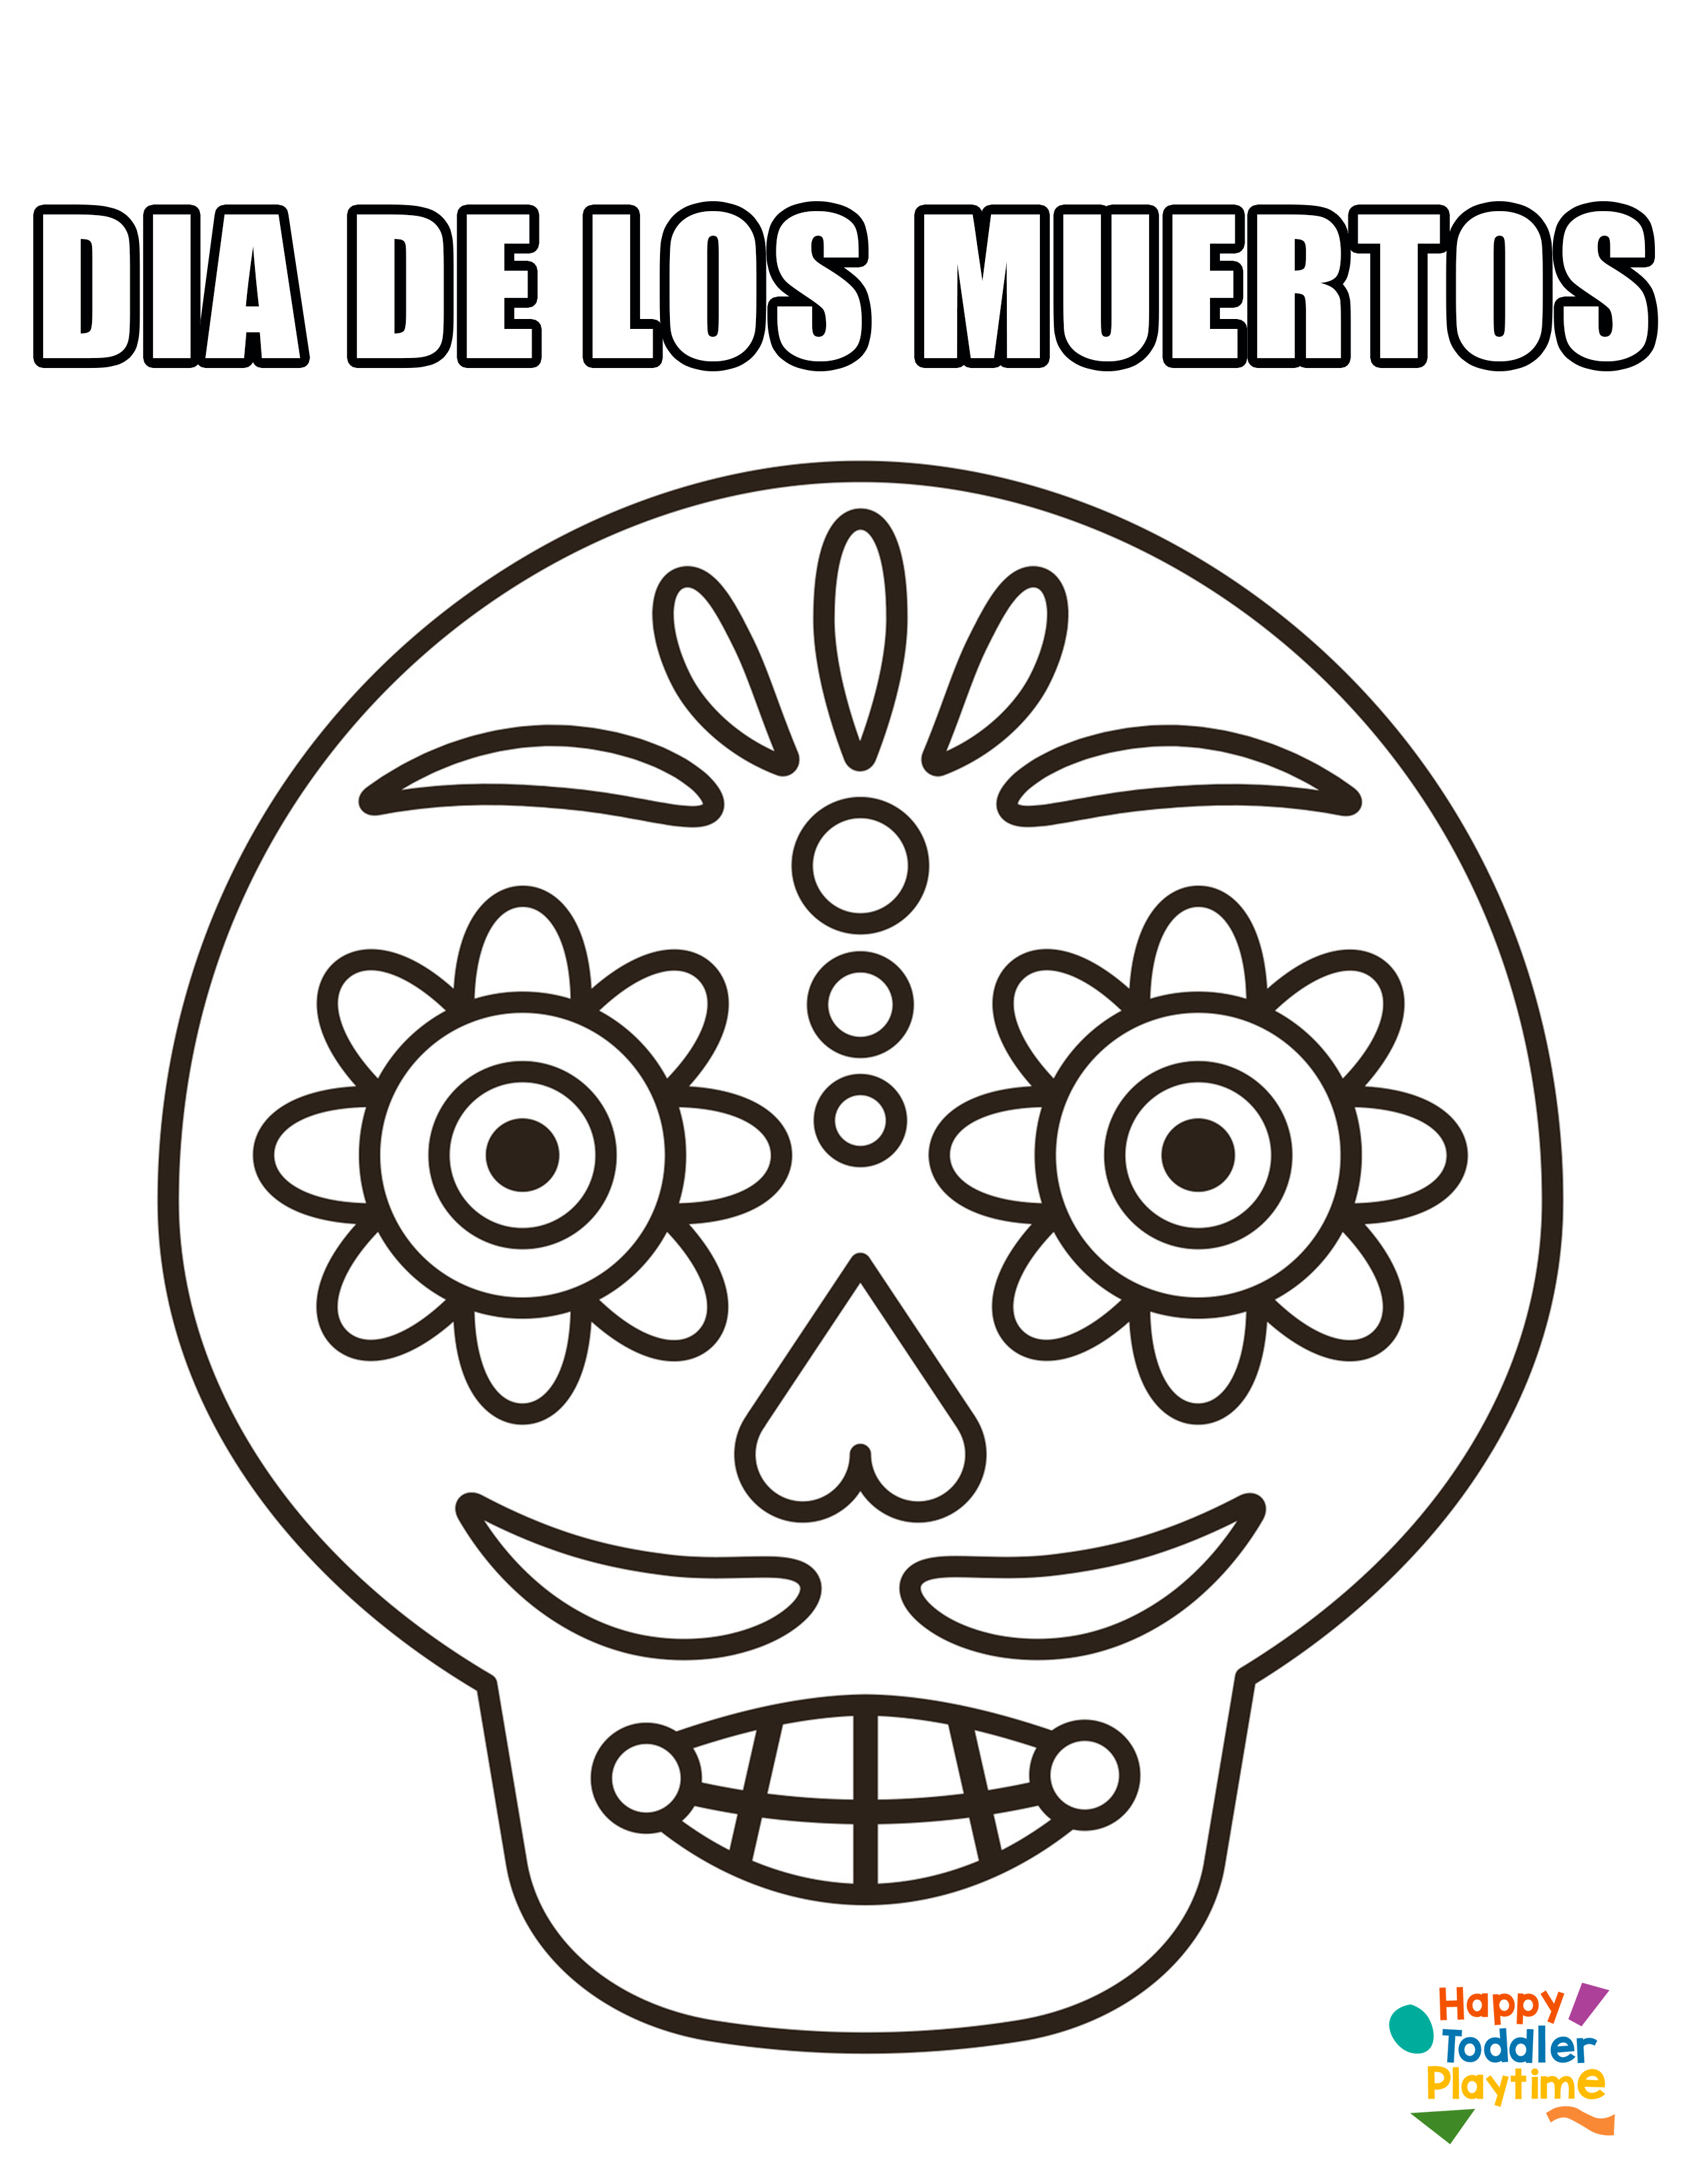 Free dia de los muertos day of the dead printable colouring pages for kids